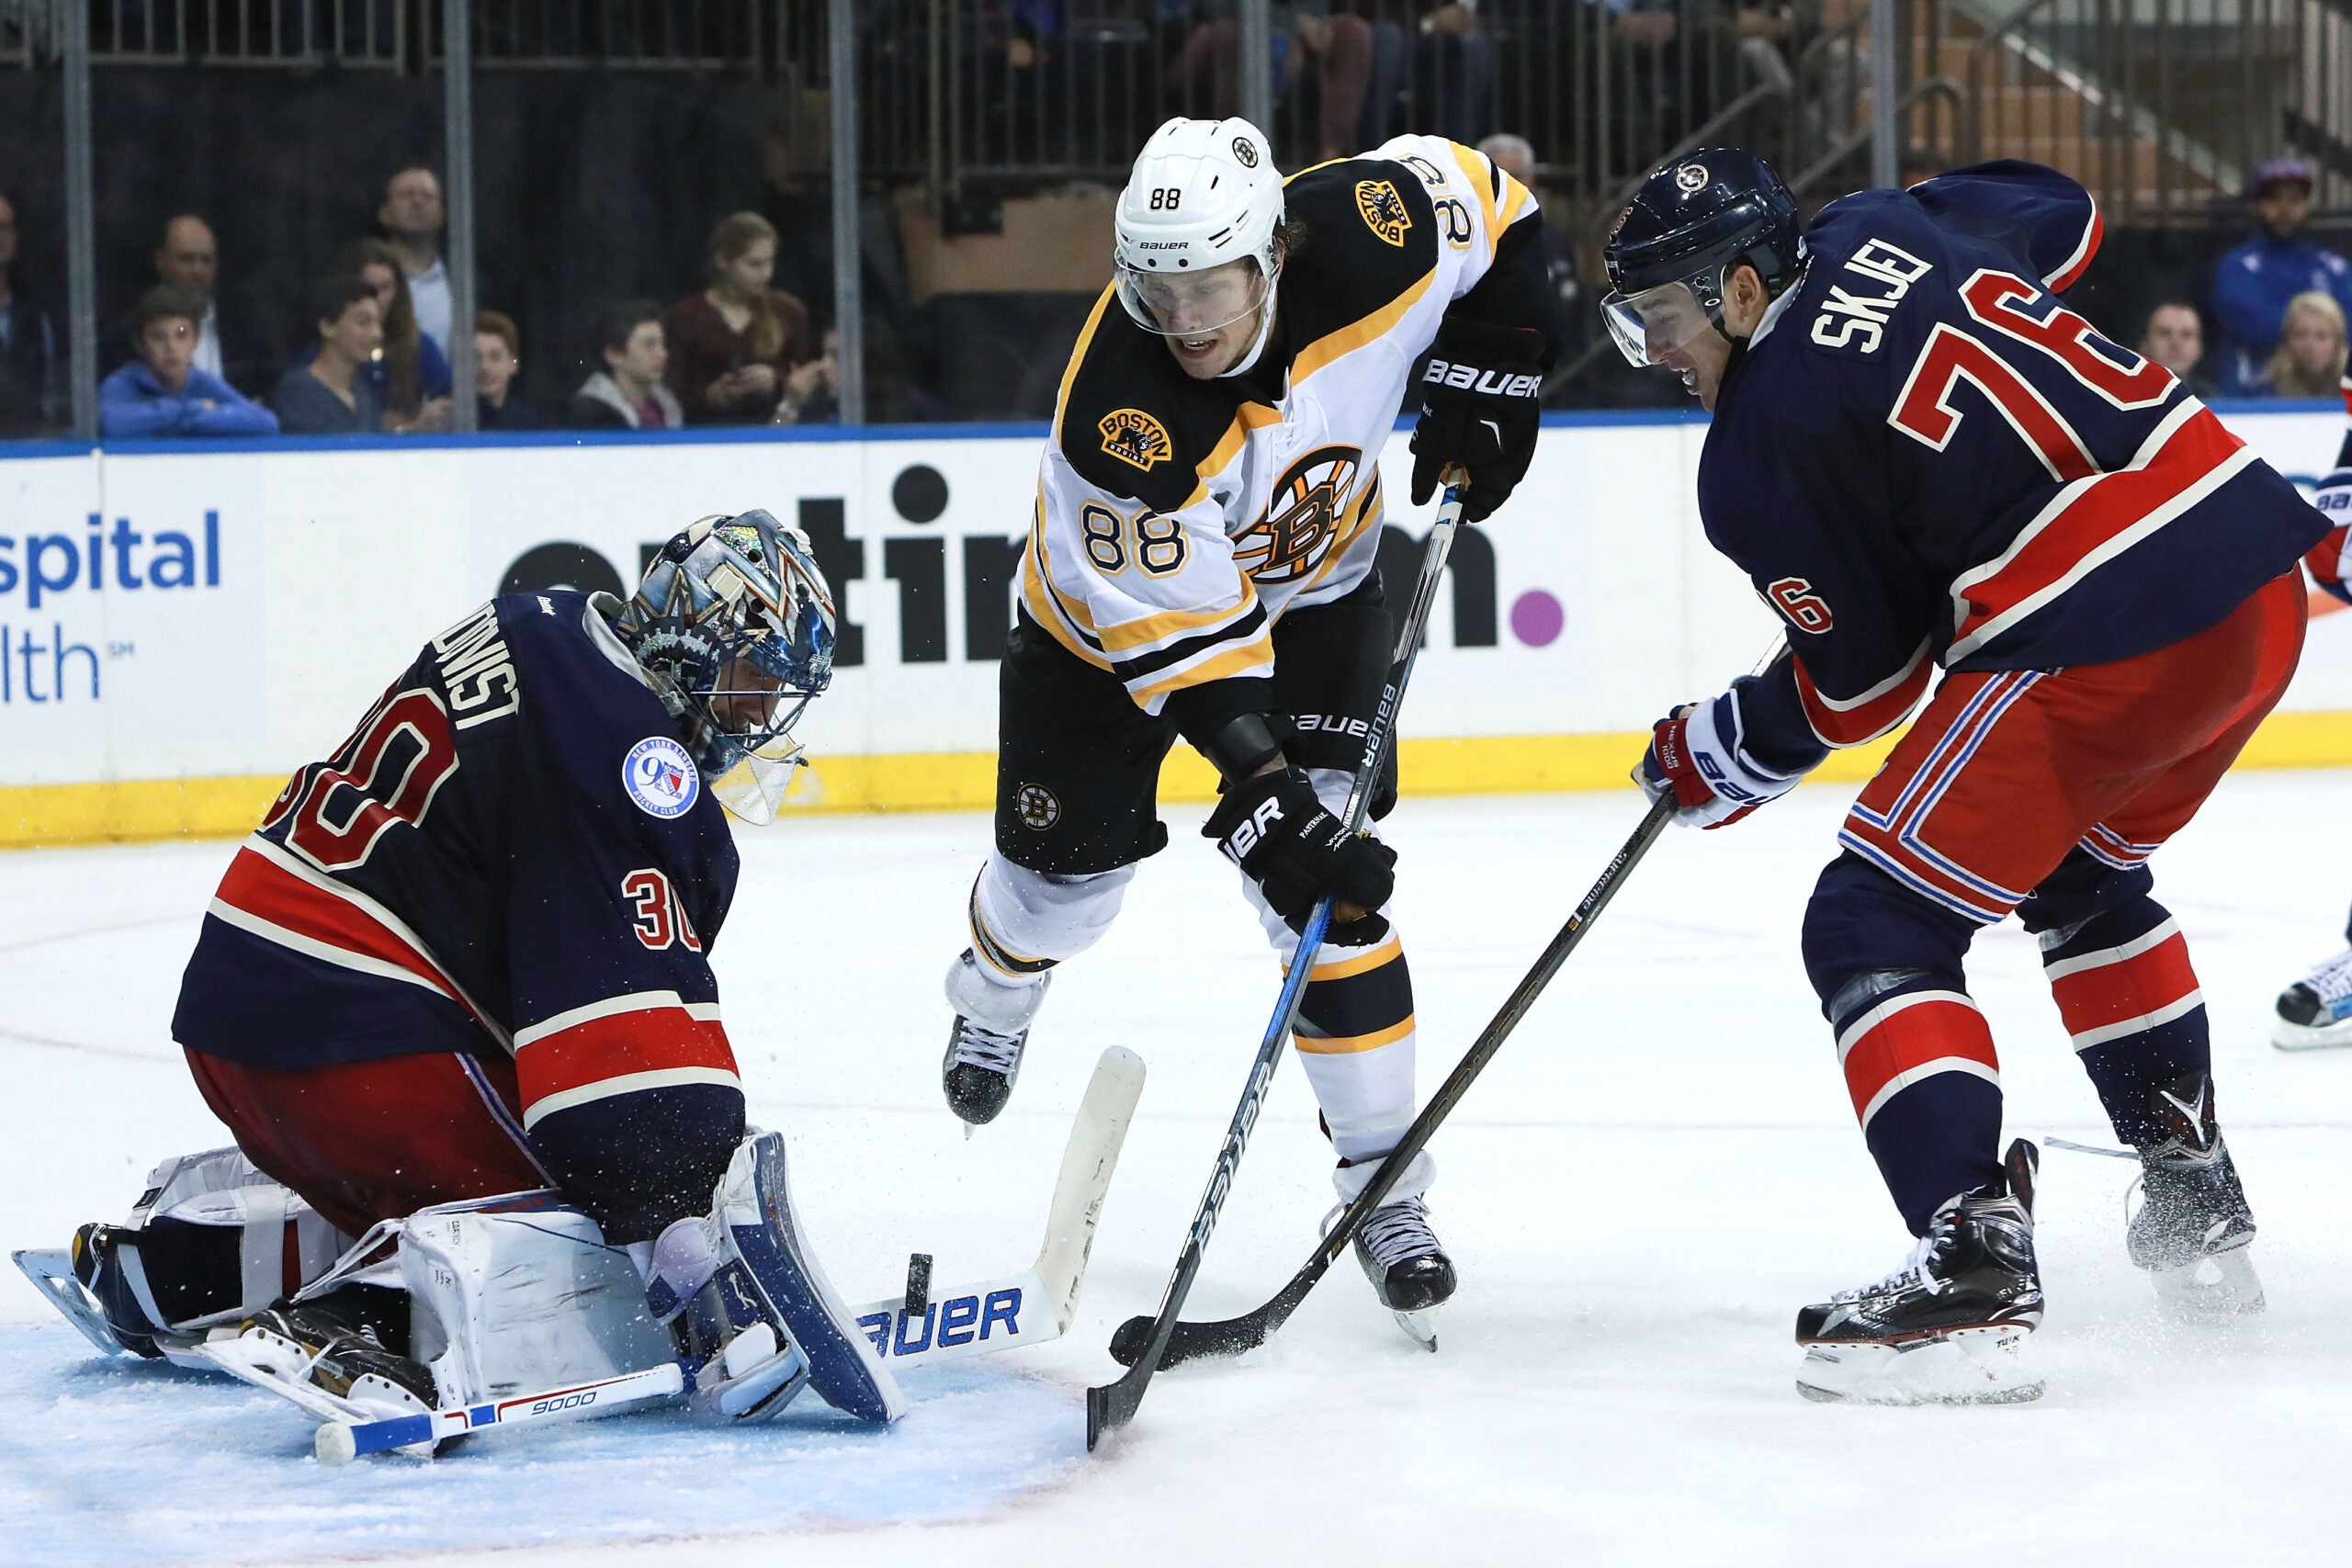 Bruins forward David Pastrnak suspended two games for illegal head check